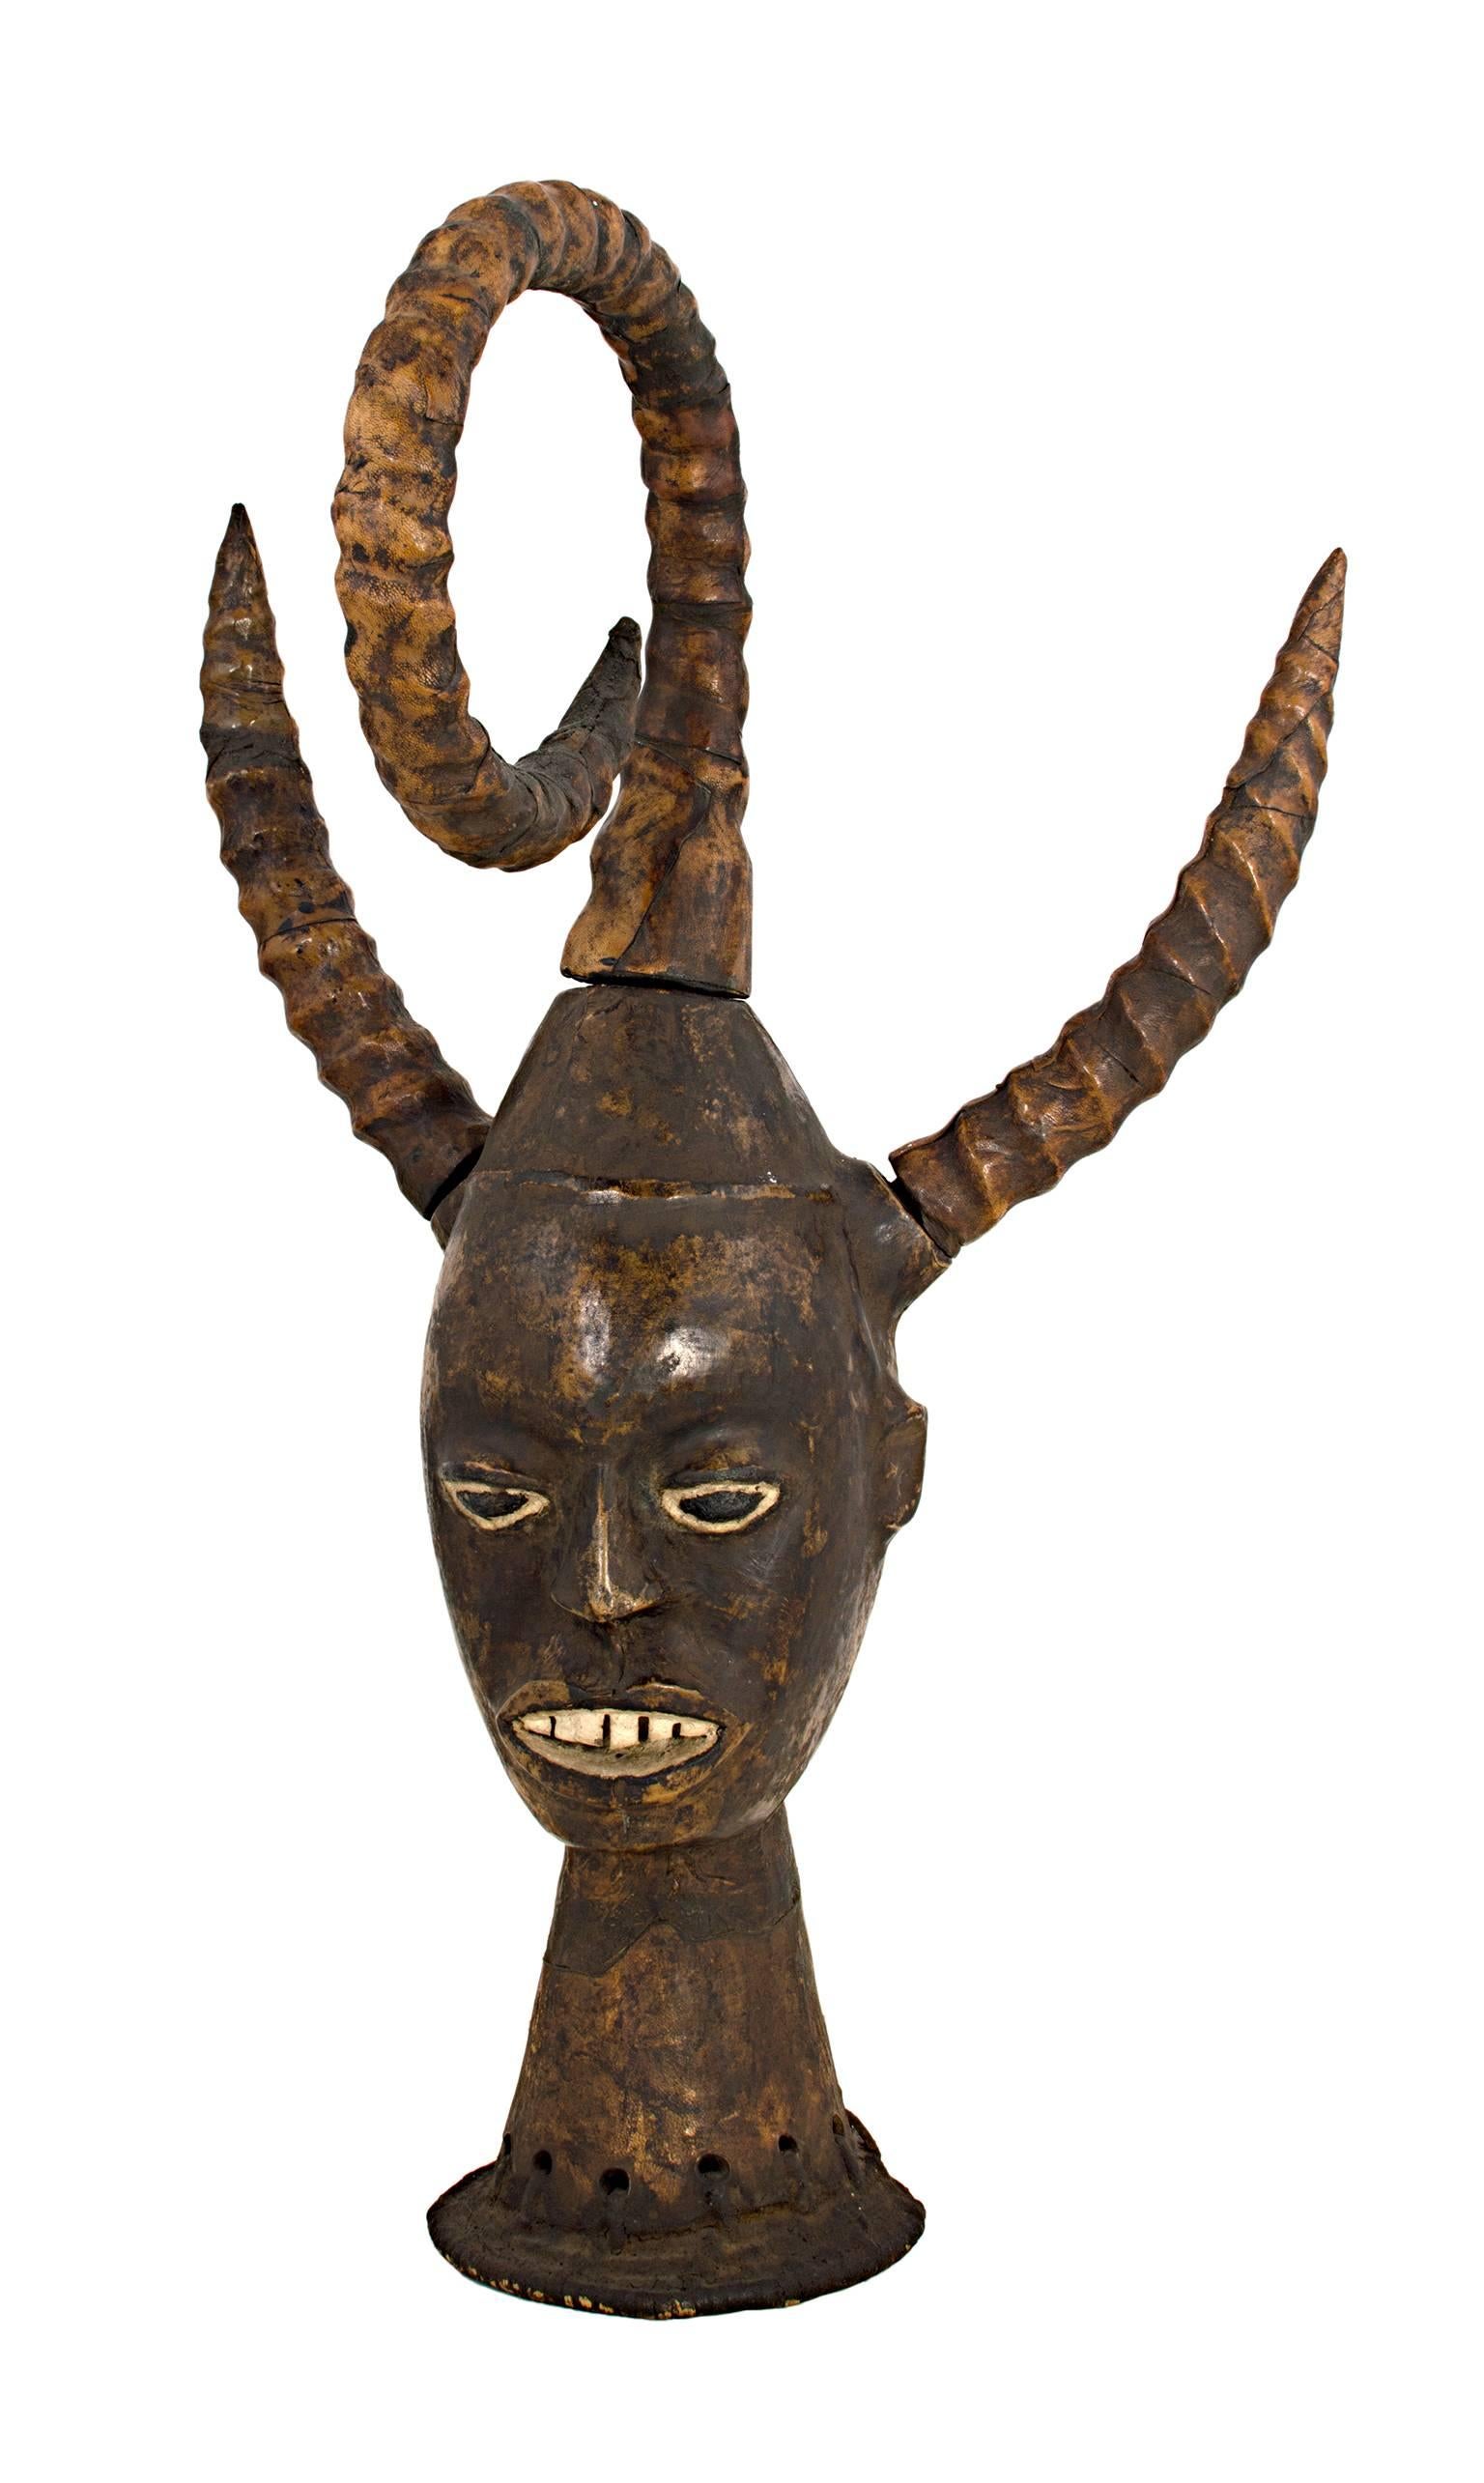 Unknown Figurative Sculpture - "Large Head with Horns - Nigerian, Ekoi People, " Carved Wood created circa 1950